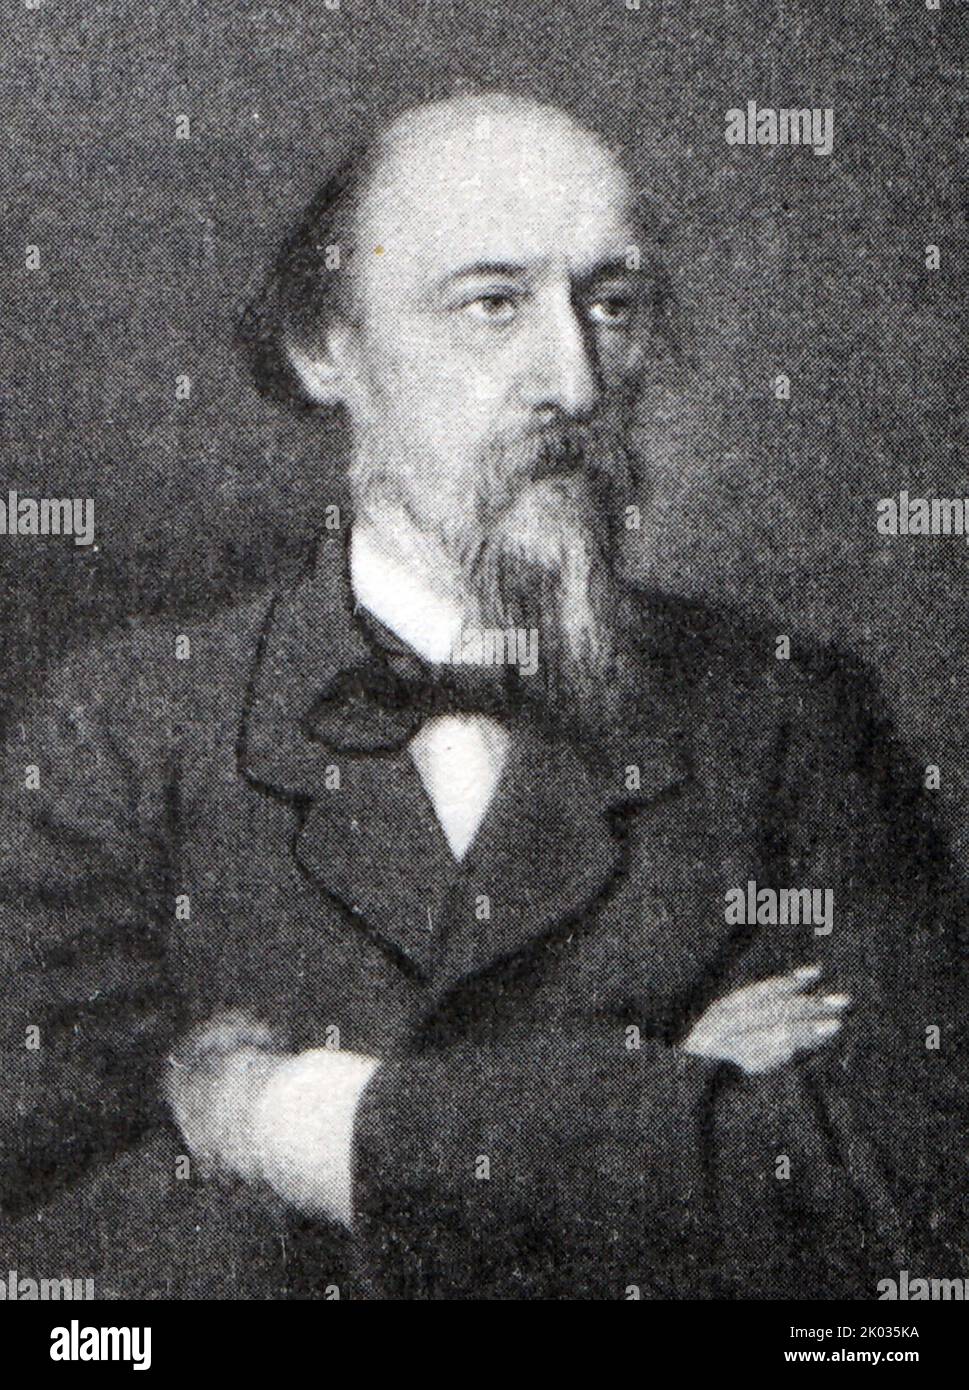 Nikolay Nekrasov (1821 - 1877) Russian poet, writer, critic and publisher, whose deeply compassionate poems about peasant Russia made him the hero of liberal and radical circles of Russian intelligentsia, as represented by Vissarion Belinsky, Nikolay Chernyshevsky and Fyodor Dostoyevsky. Stock Photo